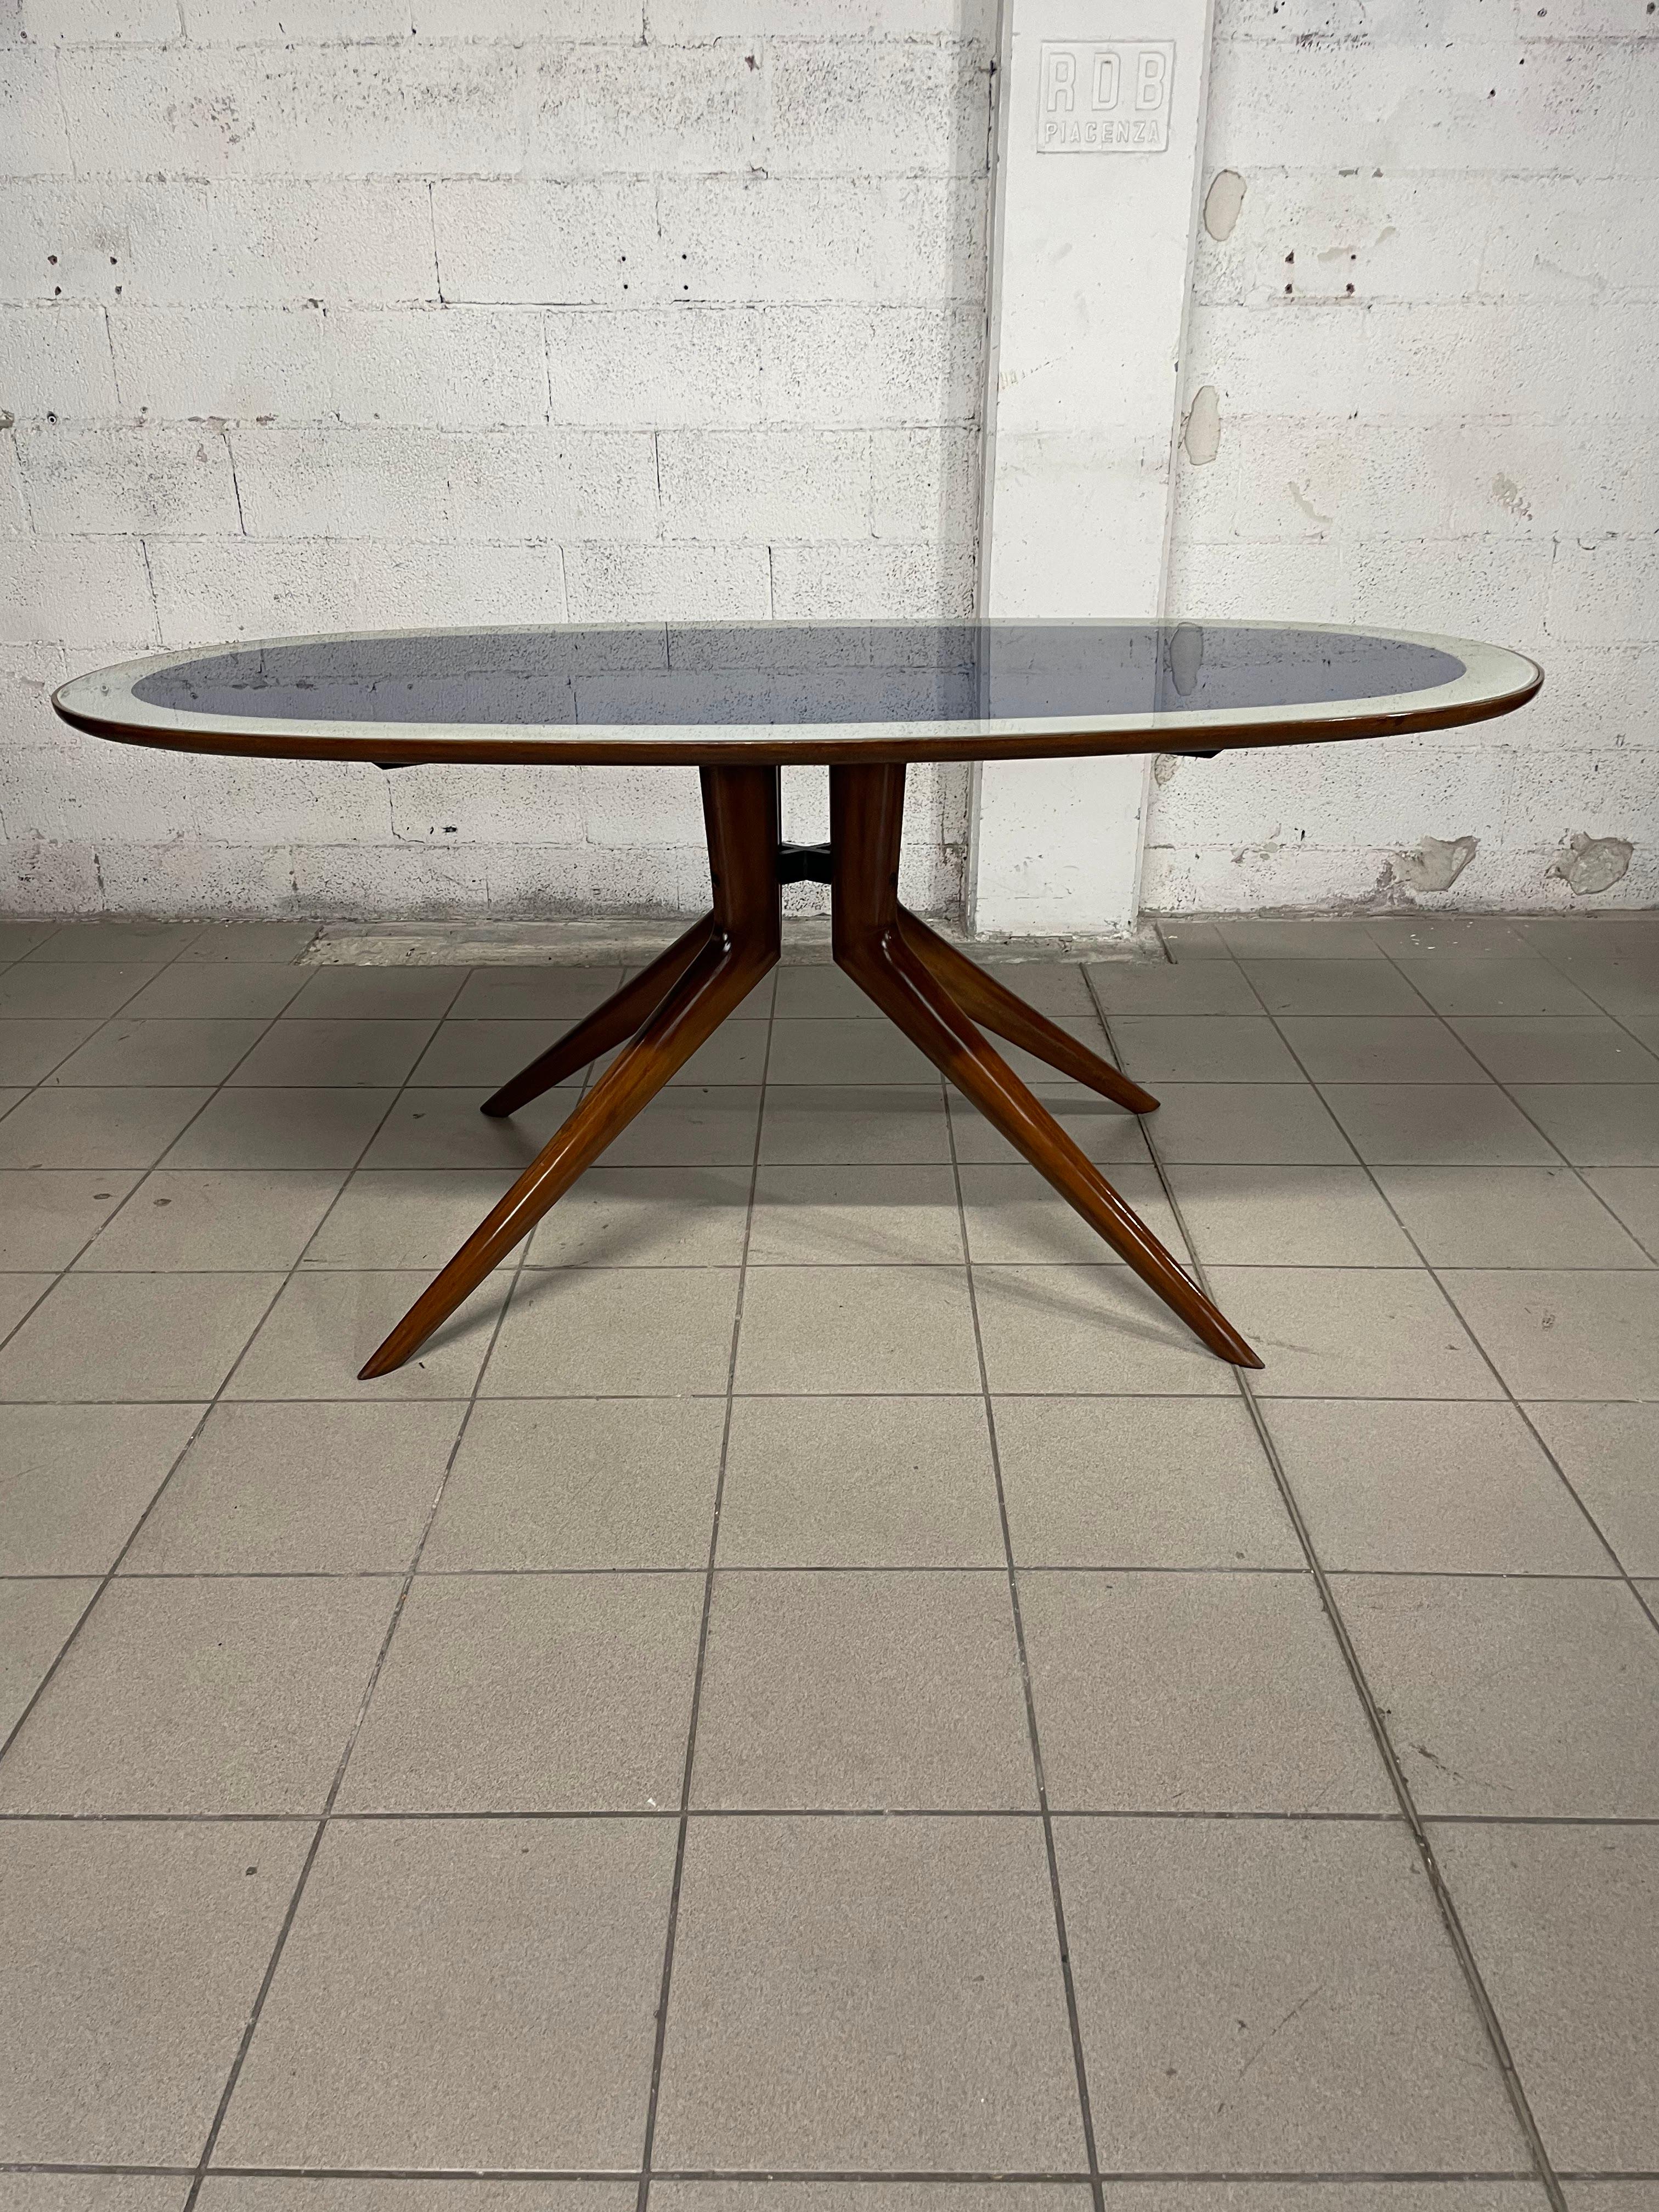 1950s oval-shaped table with polished beechwood frame and two-tone glass top.

Very elegant and suitable for any environment.

We point out that the colored paper underneath the glass has suffered from moisture over the years and as a result has